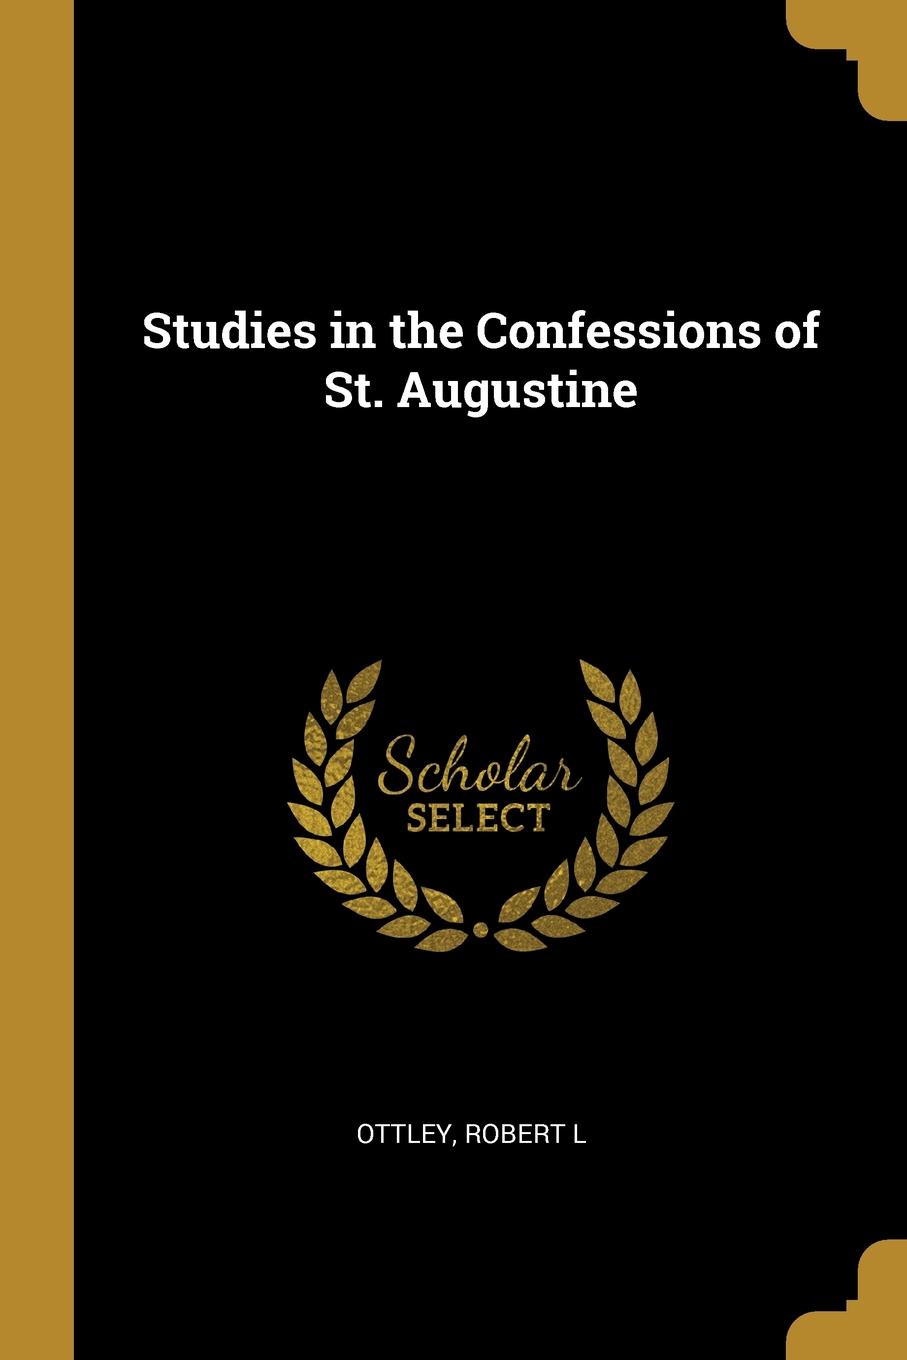 Studies in the Confessions of St. Augustine